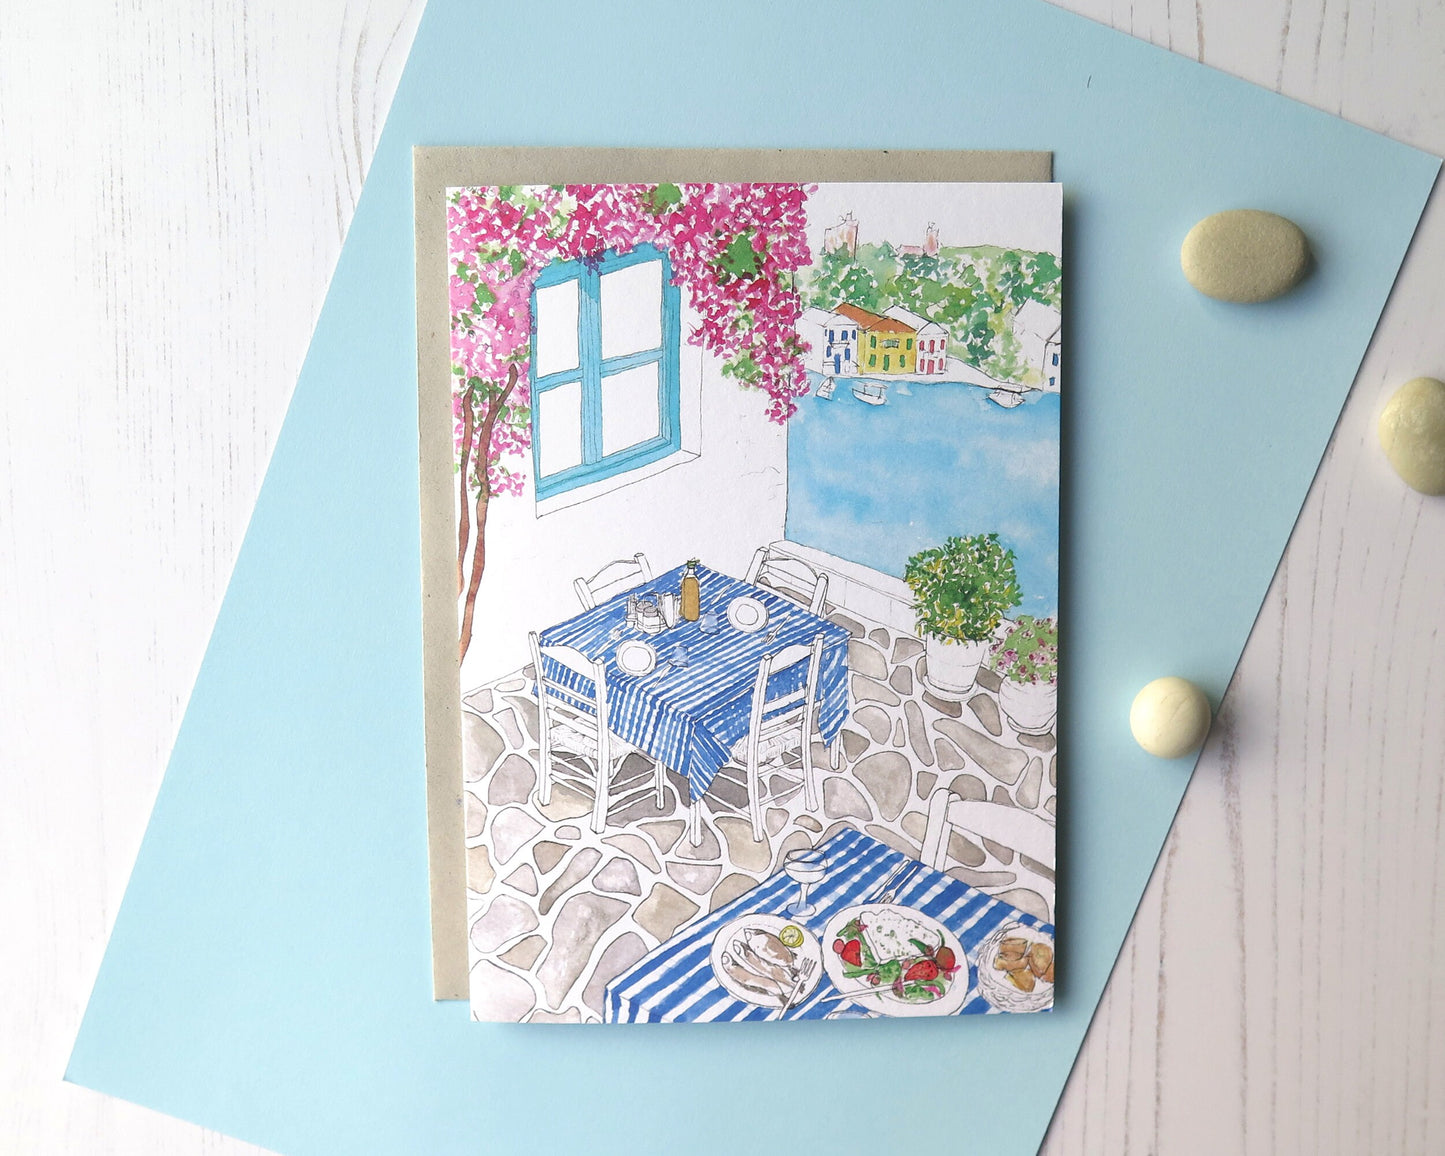 Summer Holiday Pack of 4 Cards